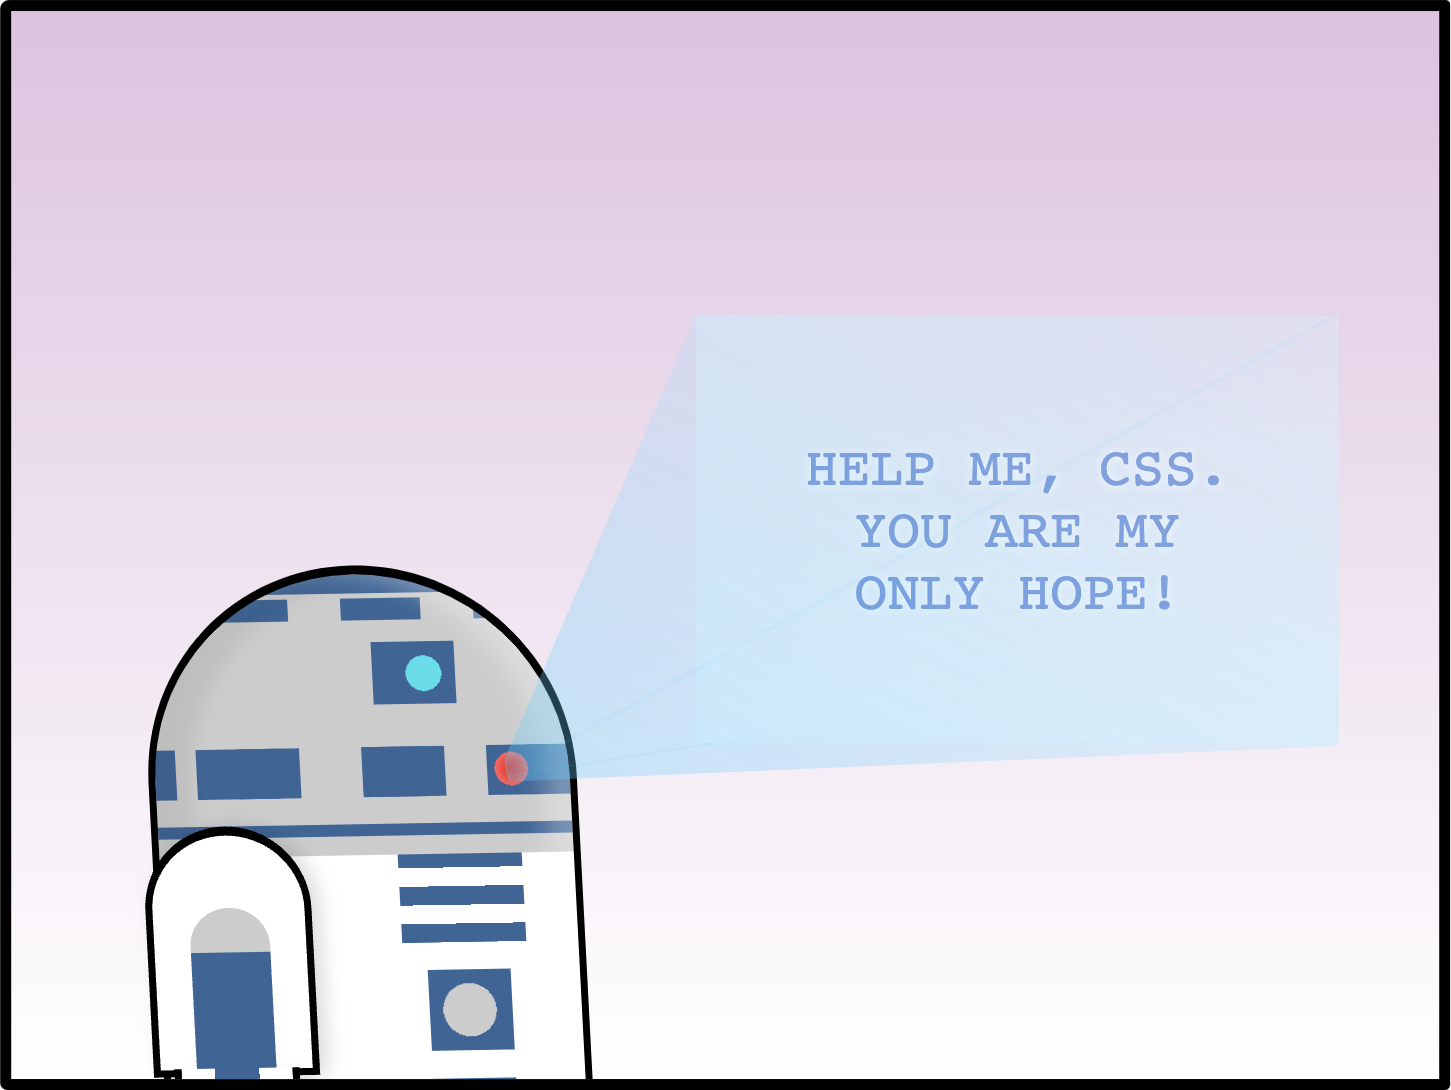 Cartoon showing R2D2, a robot from the movie Star Wars, projecting a hologram that reads: 'Help me, CSS. You are my only hope!'